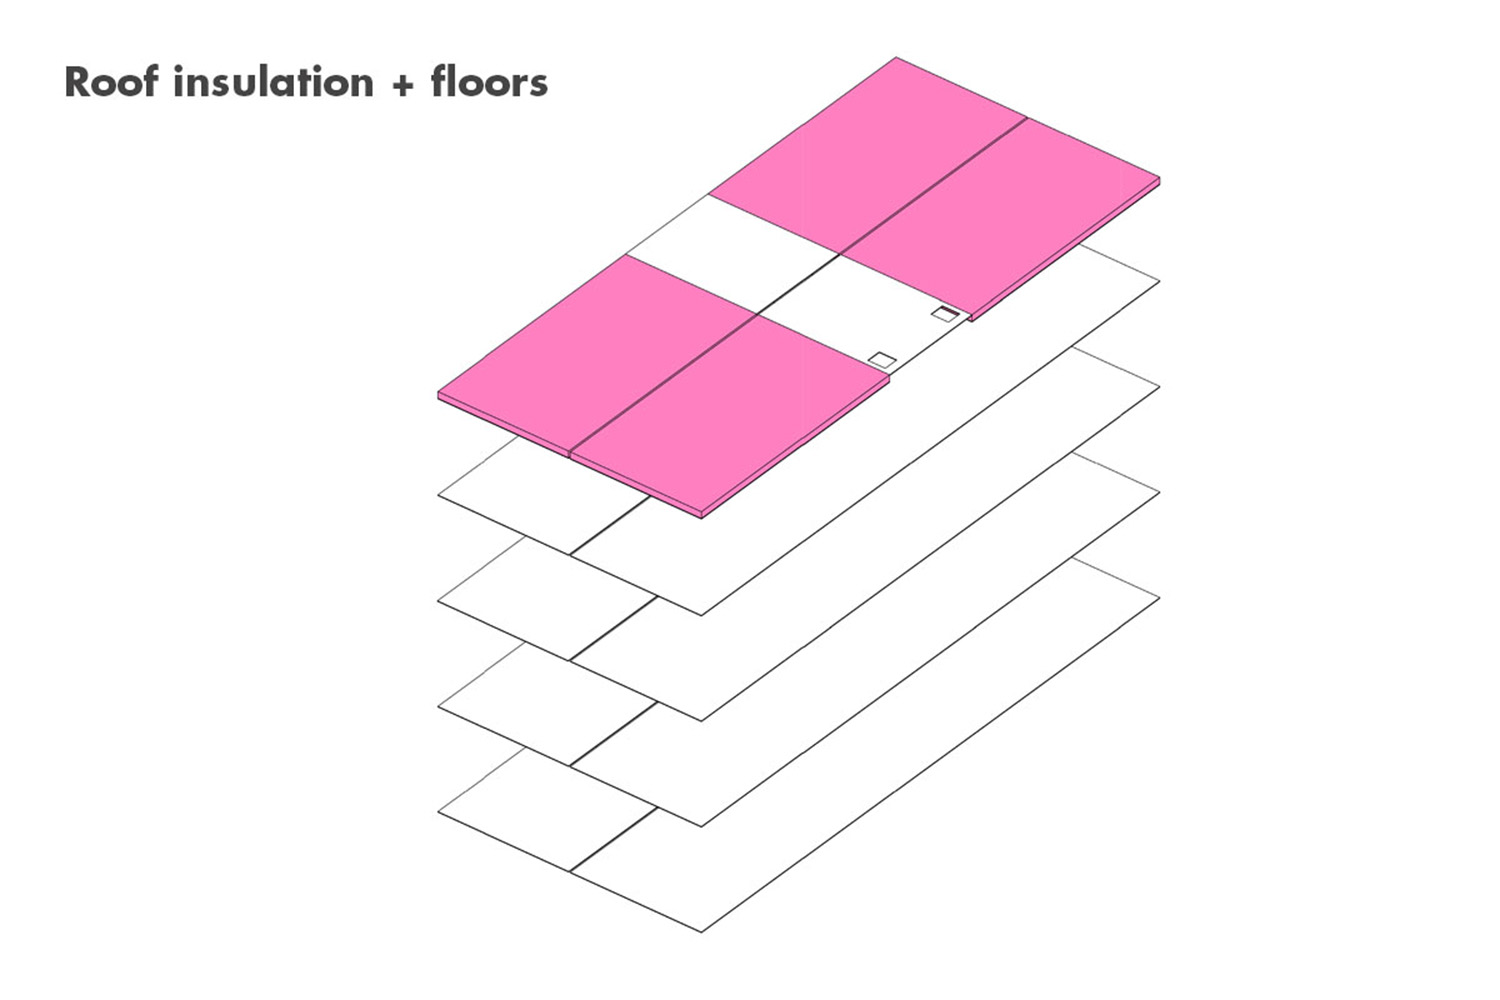 Roof insulation and flooring layout of modular building 